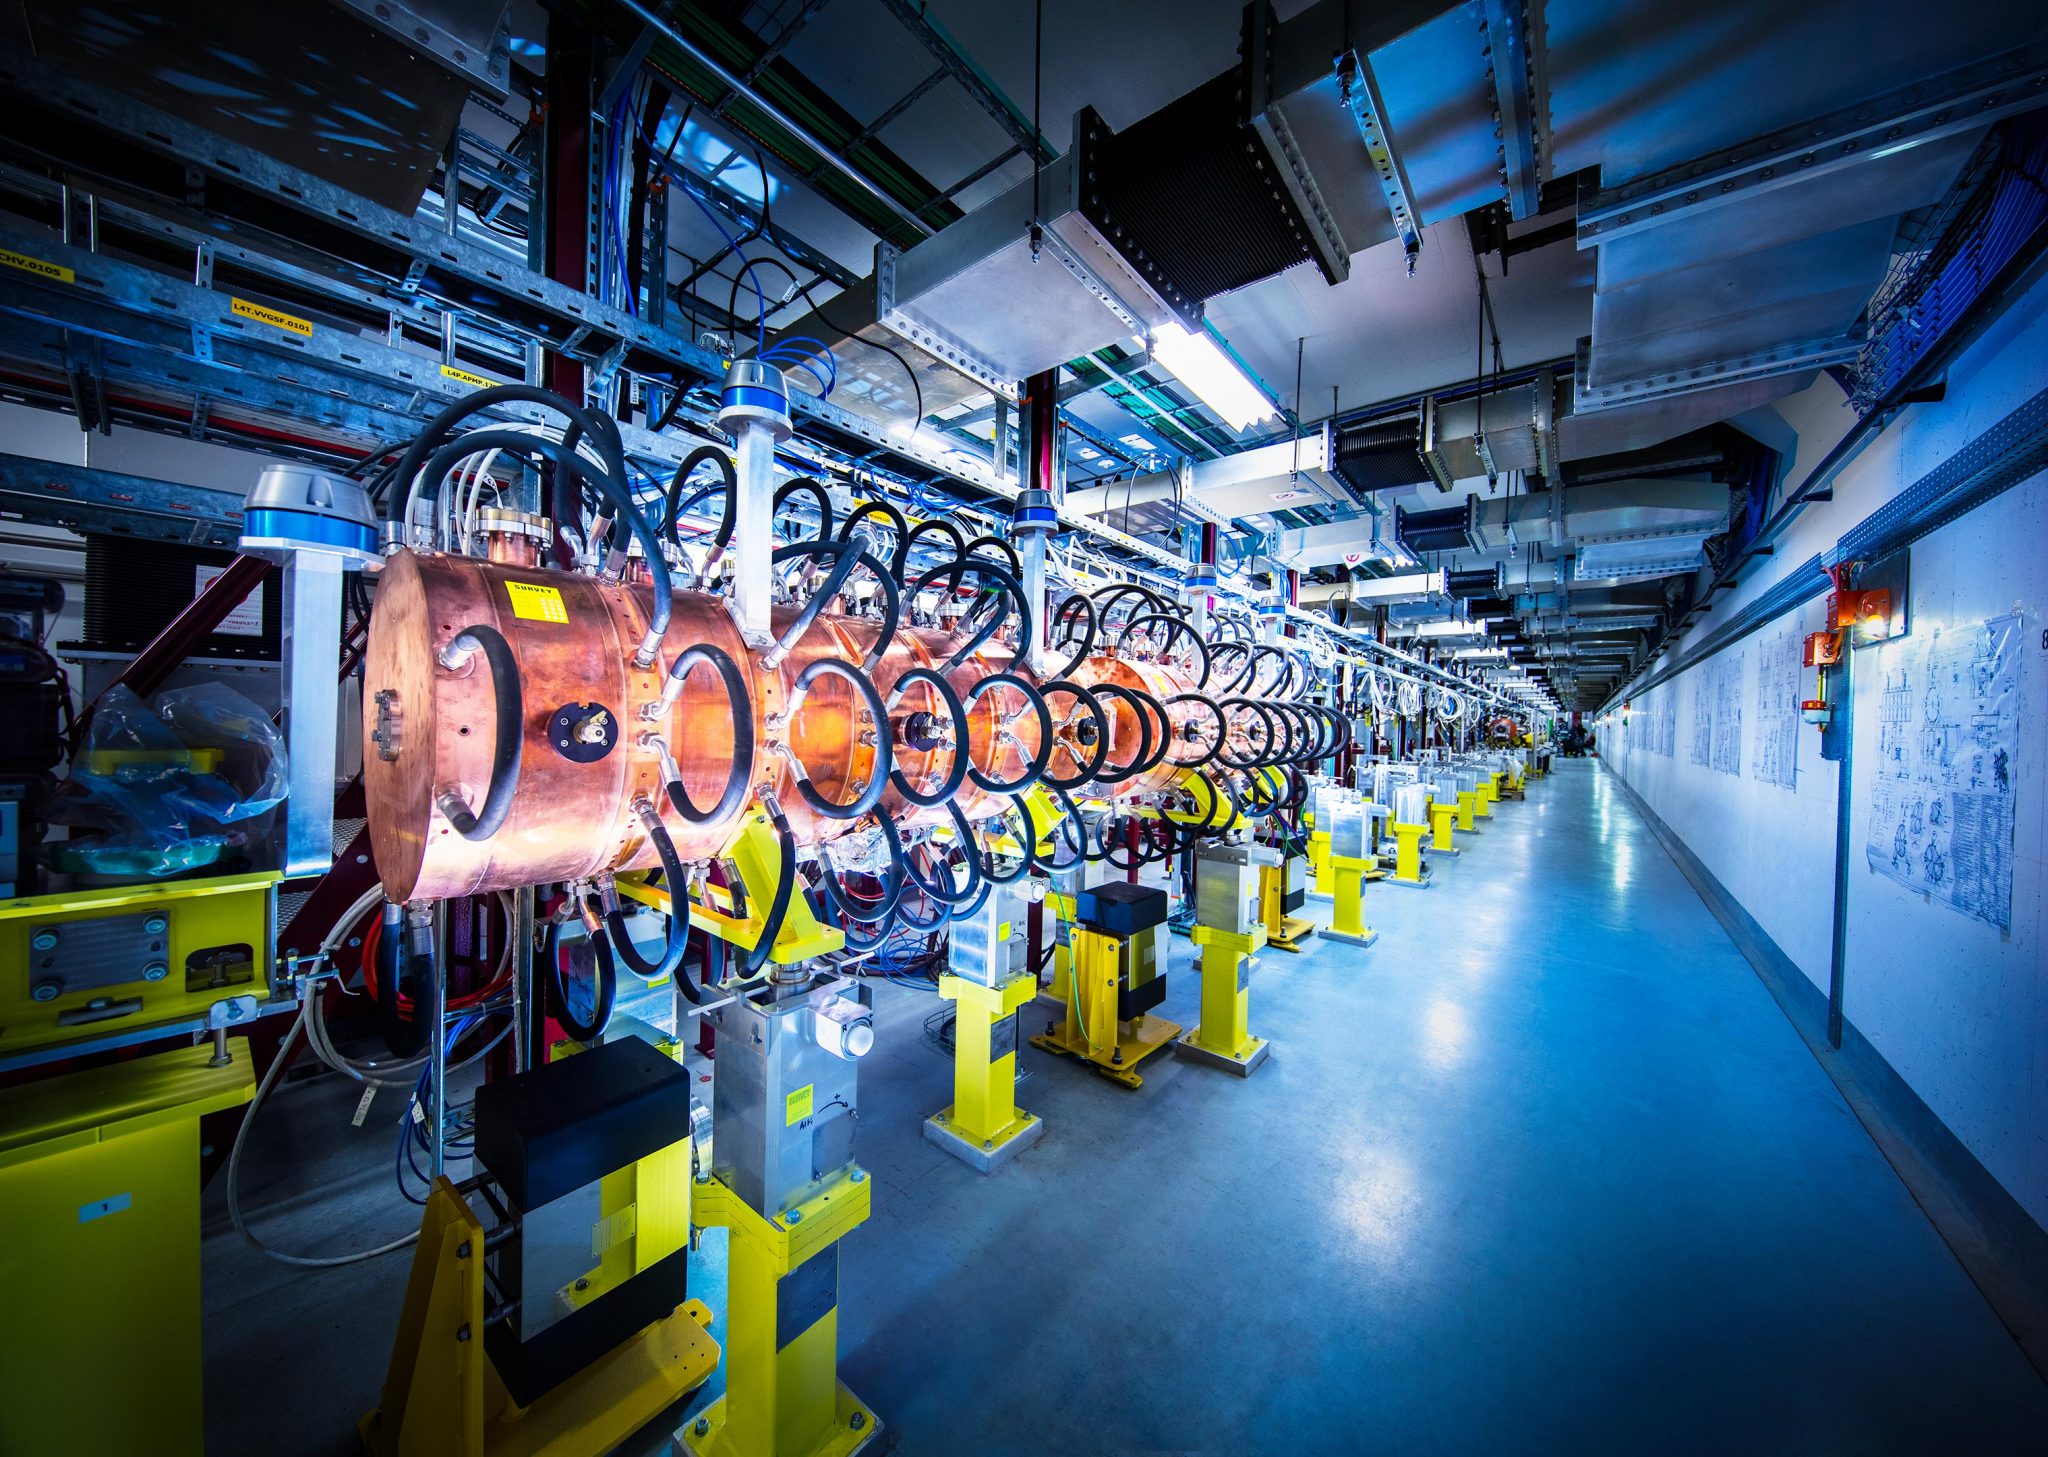 CERN’s Newest Accelerator Awakens Linac 4 Has Taken Over As the First